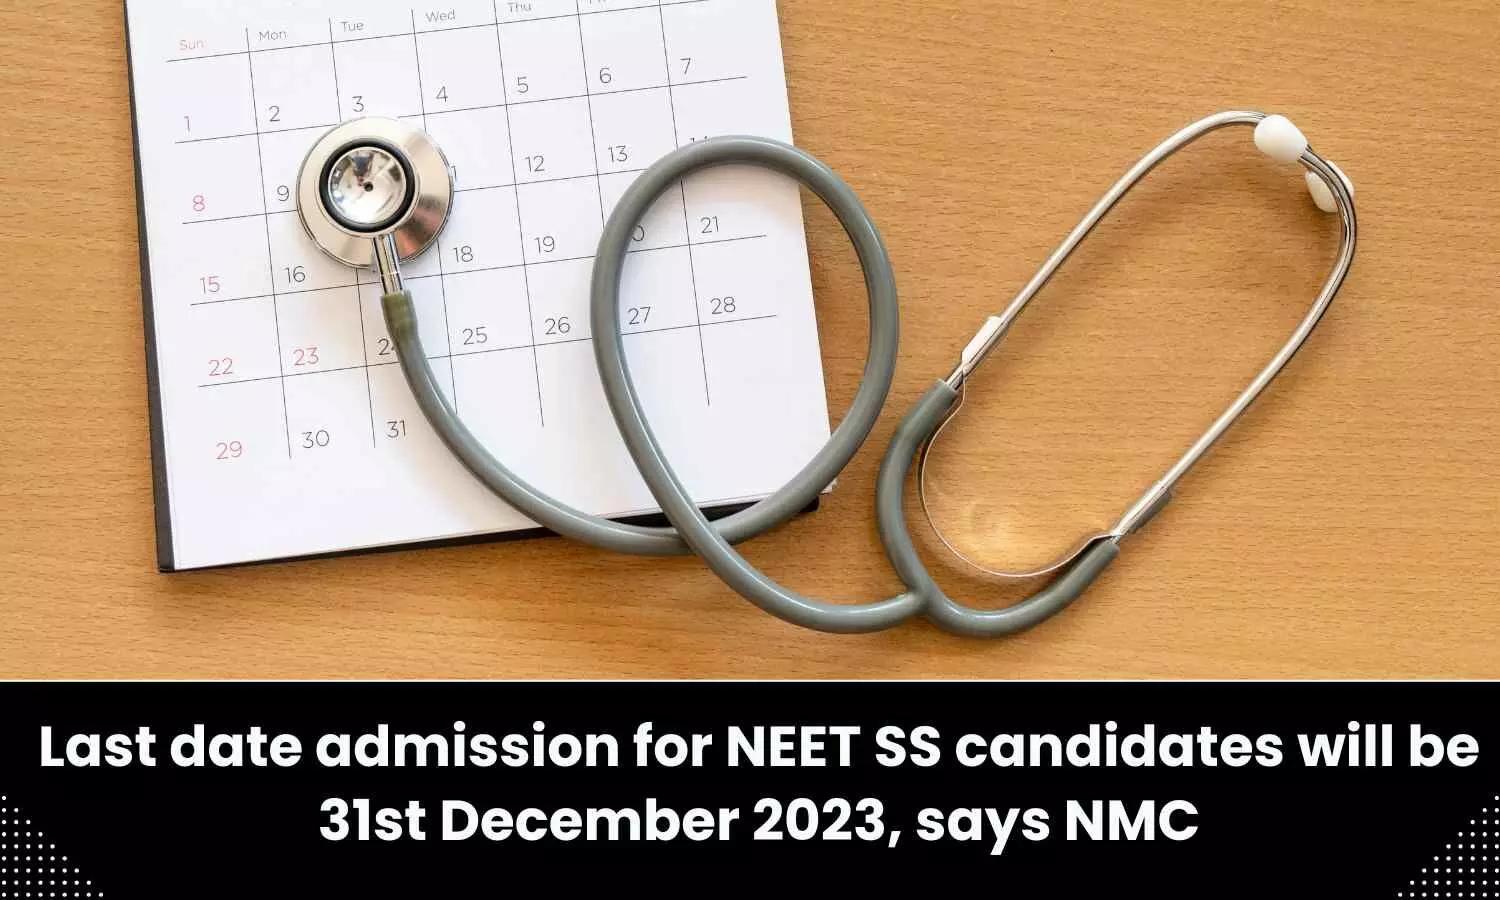 Last date admission for NEET SS candidates will be 31st December 2023, says NMC